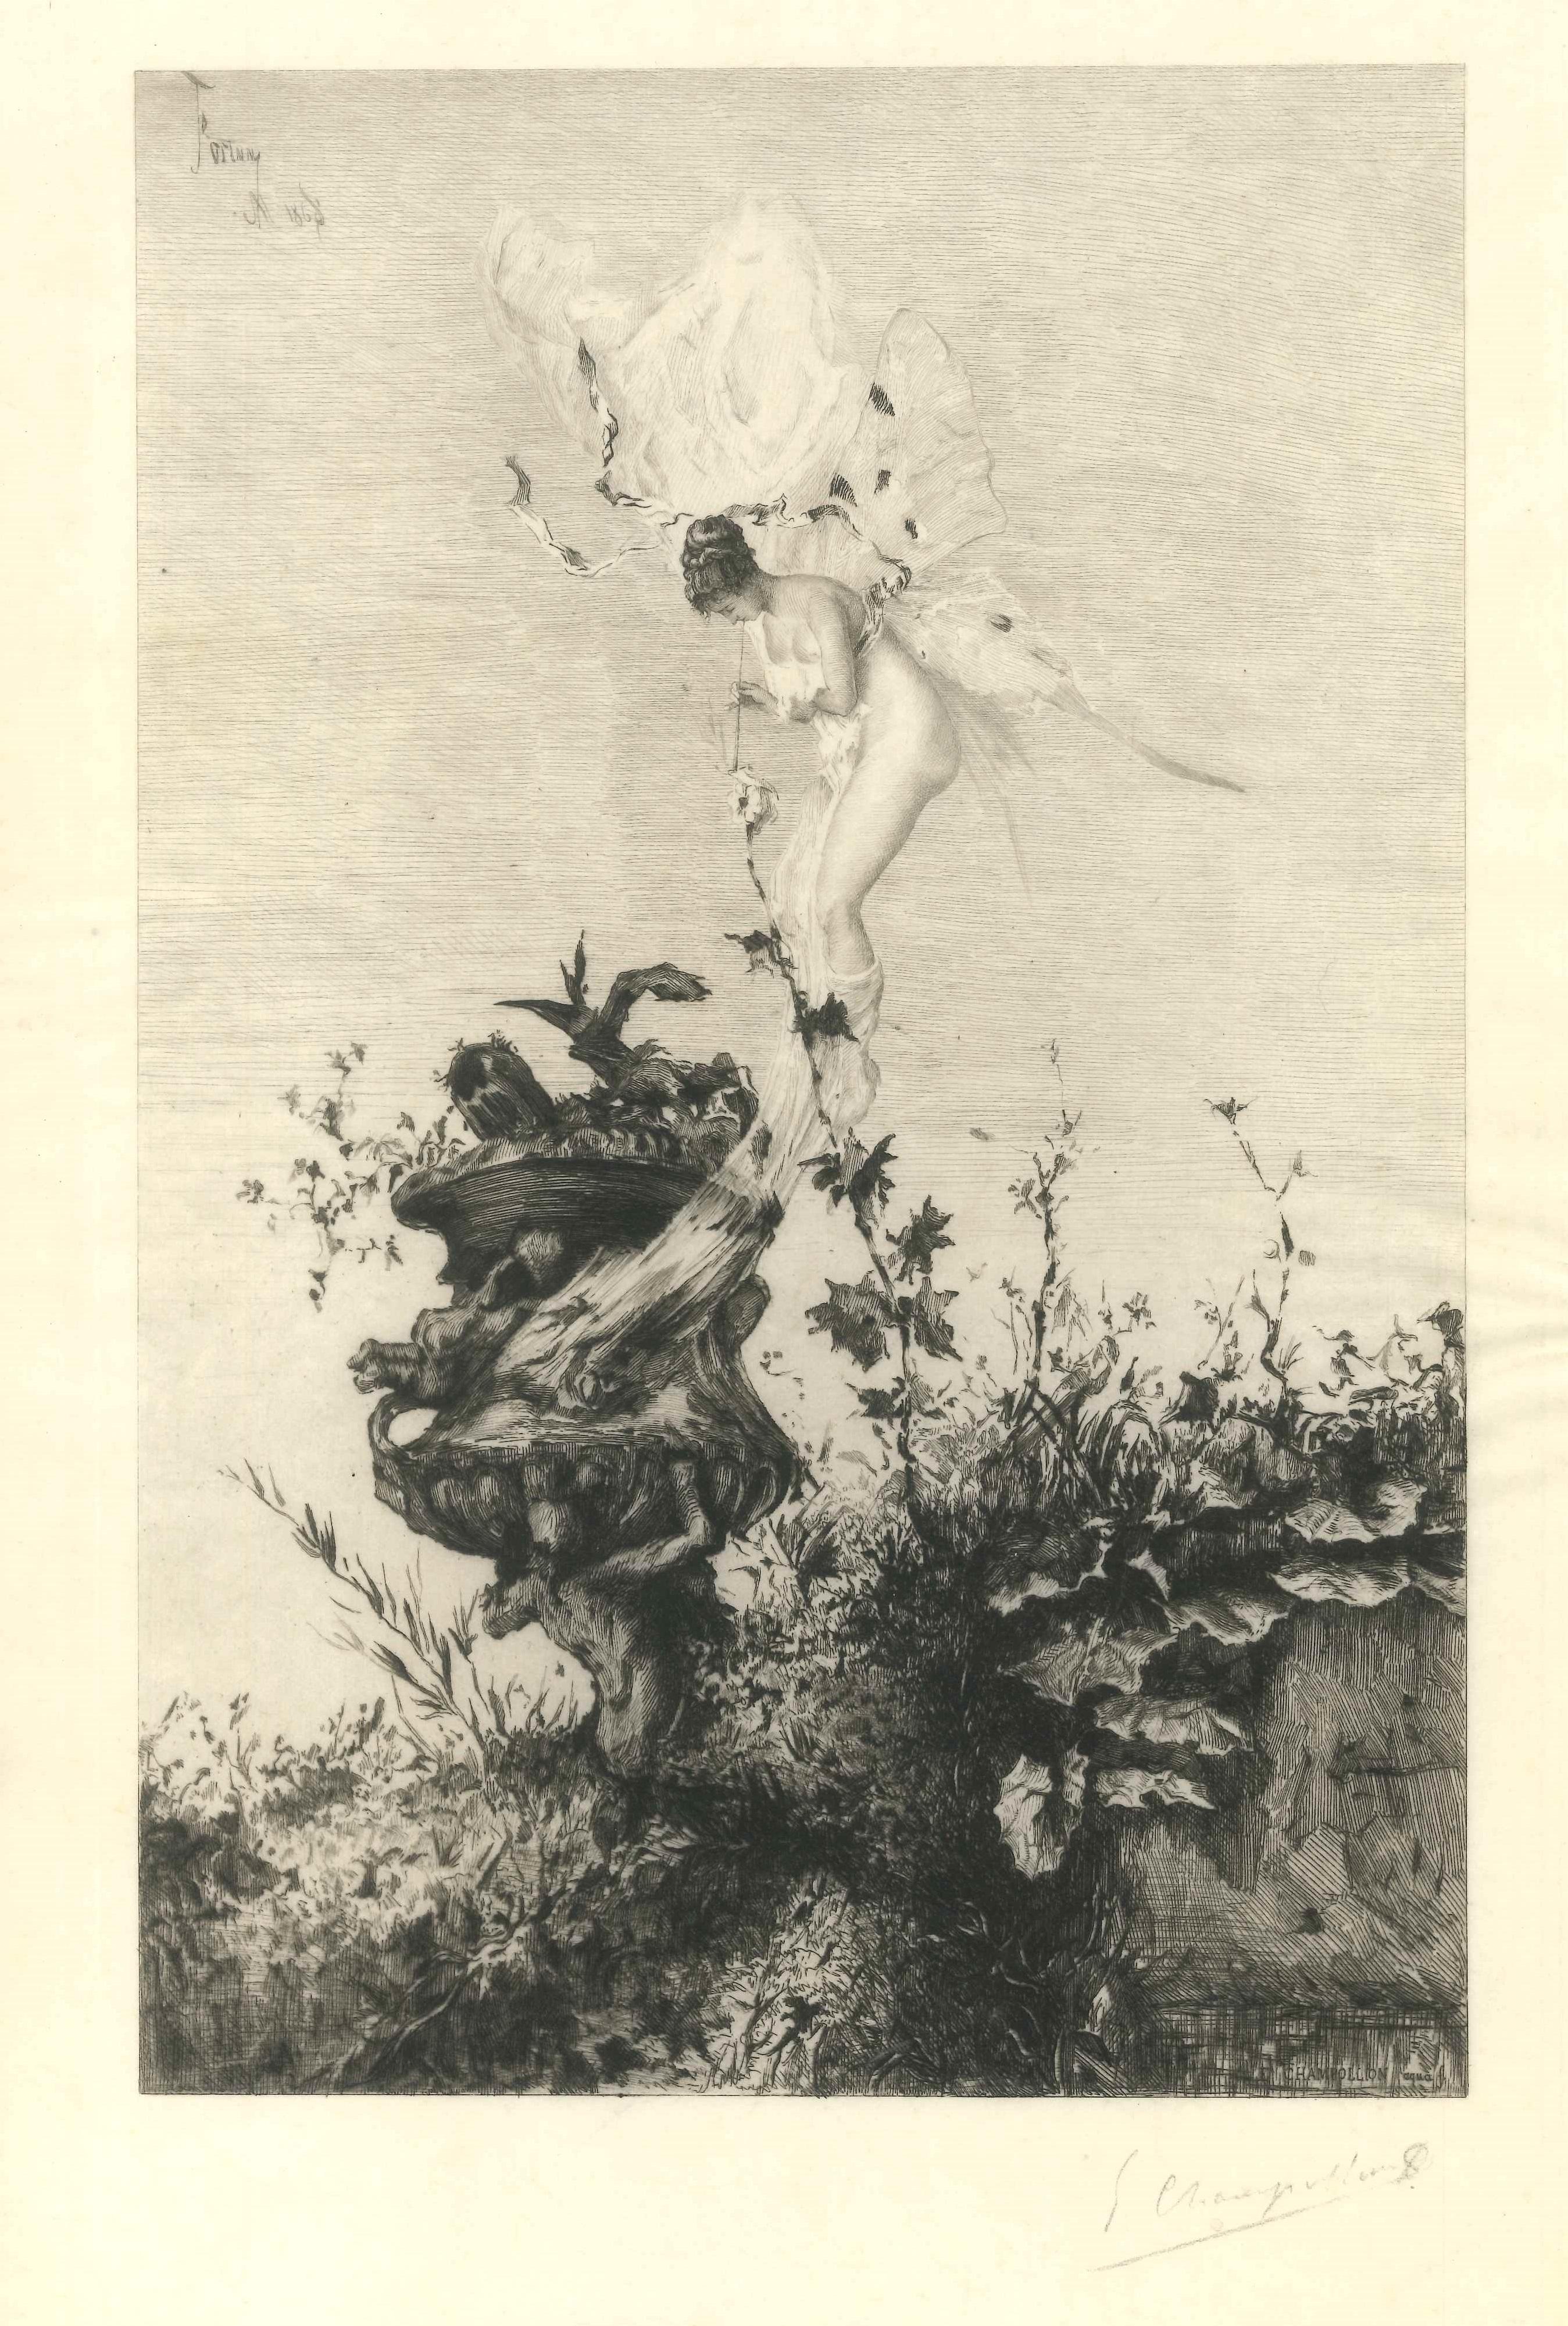 Eugène Champollion Print - The Butterfly of Fortuny - Original Etching d'Après Mariano Fortuny - 1868